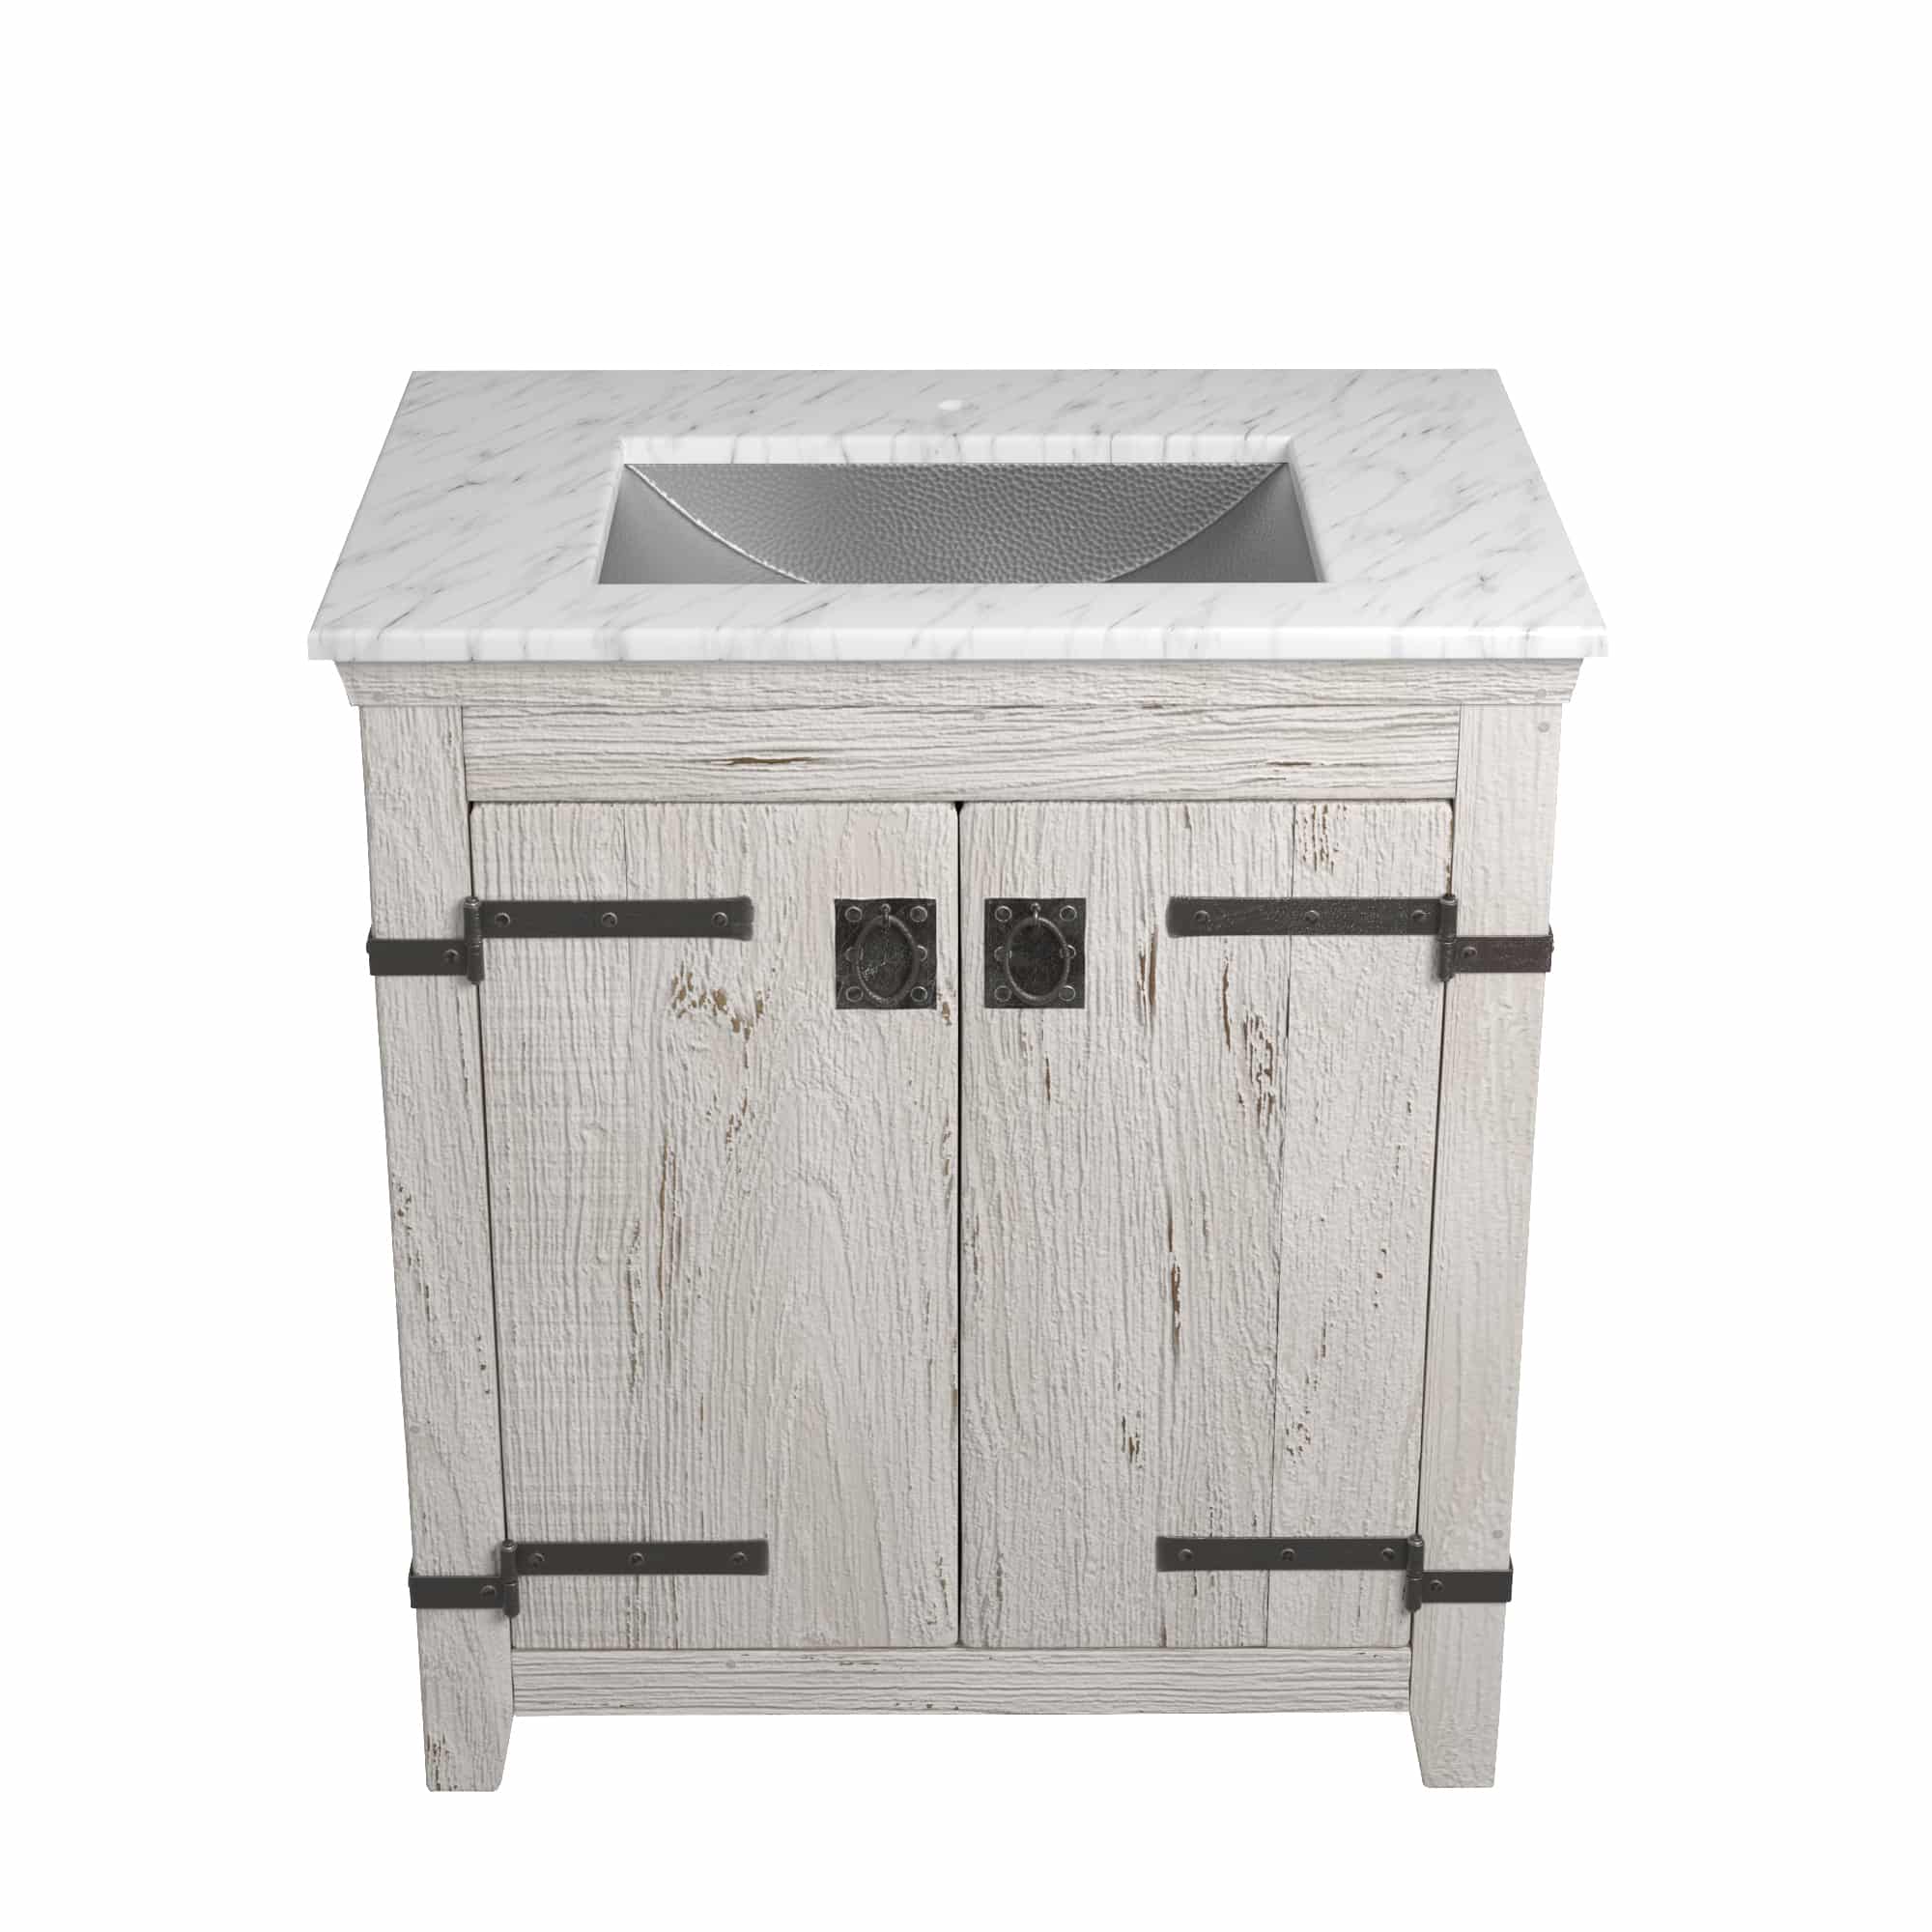 Native Trails 30" Americana Vanity in Whitewash with Carrara Marble Top and Avila in Brushed Nickel, Single Faucet Hole, BND30-VB-CT-CP-017